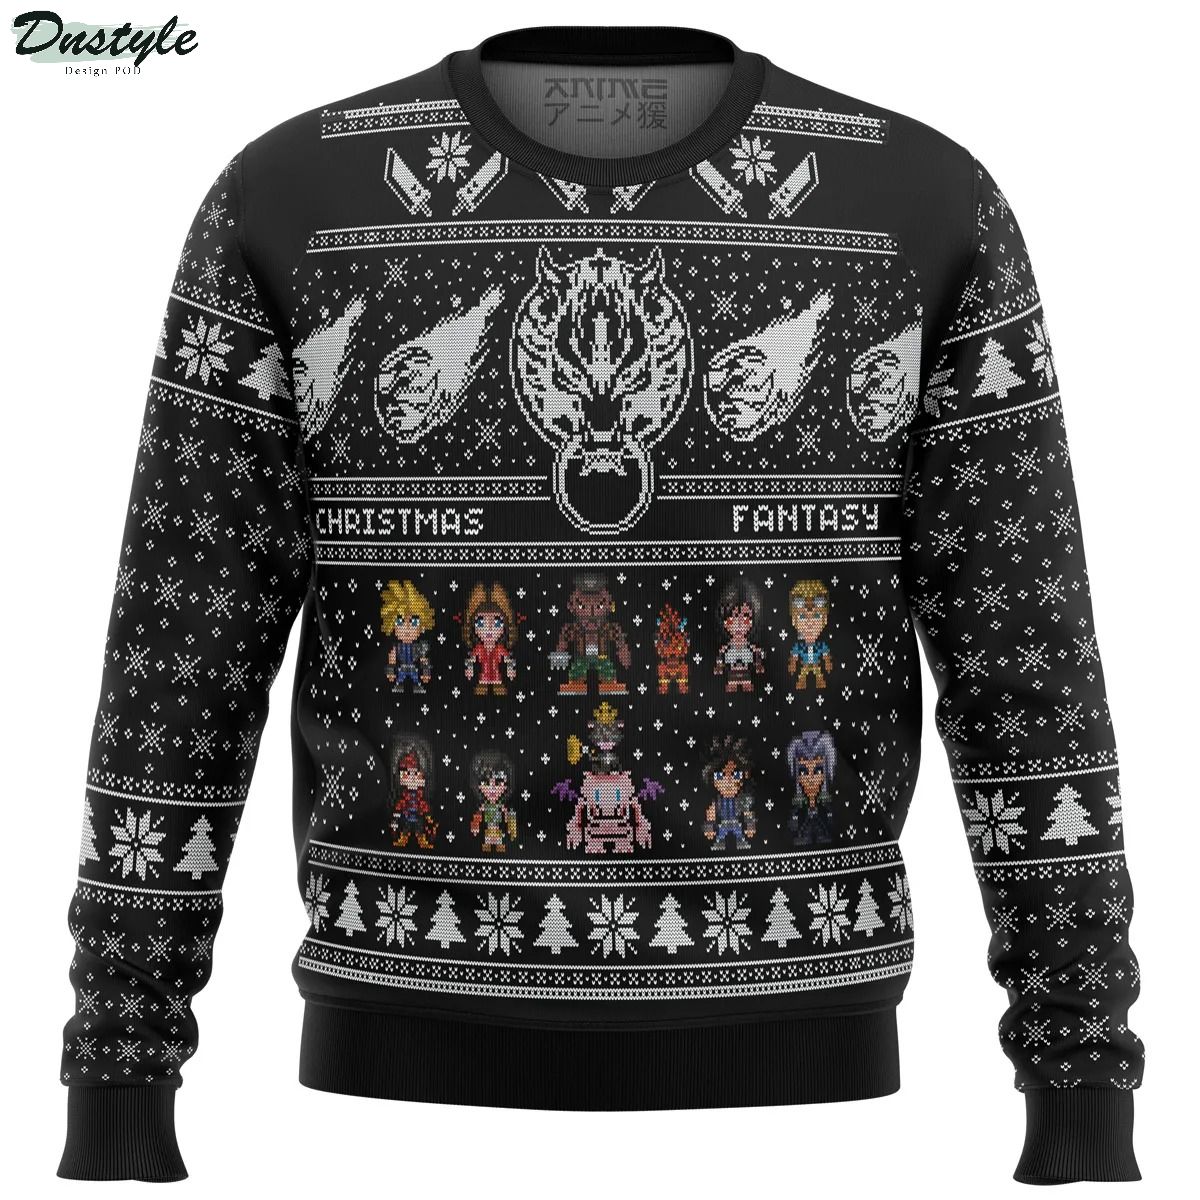 Final Fantasy 7 VII FF7 Ugly Christmas Sweater